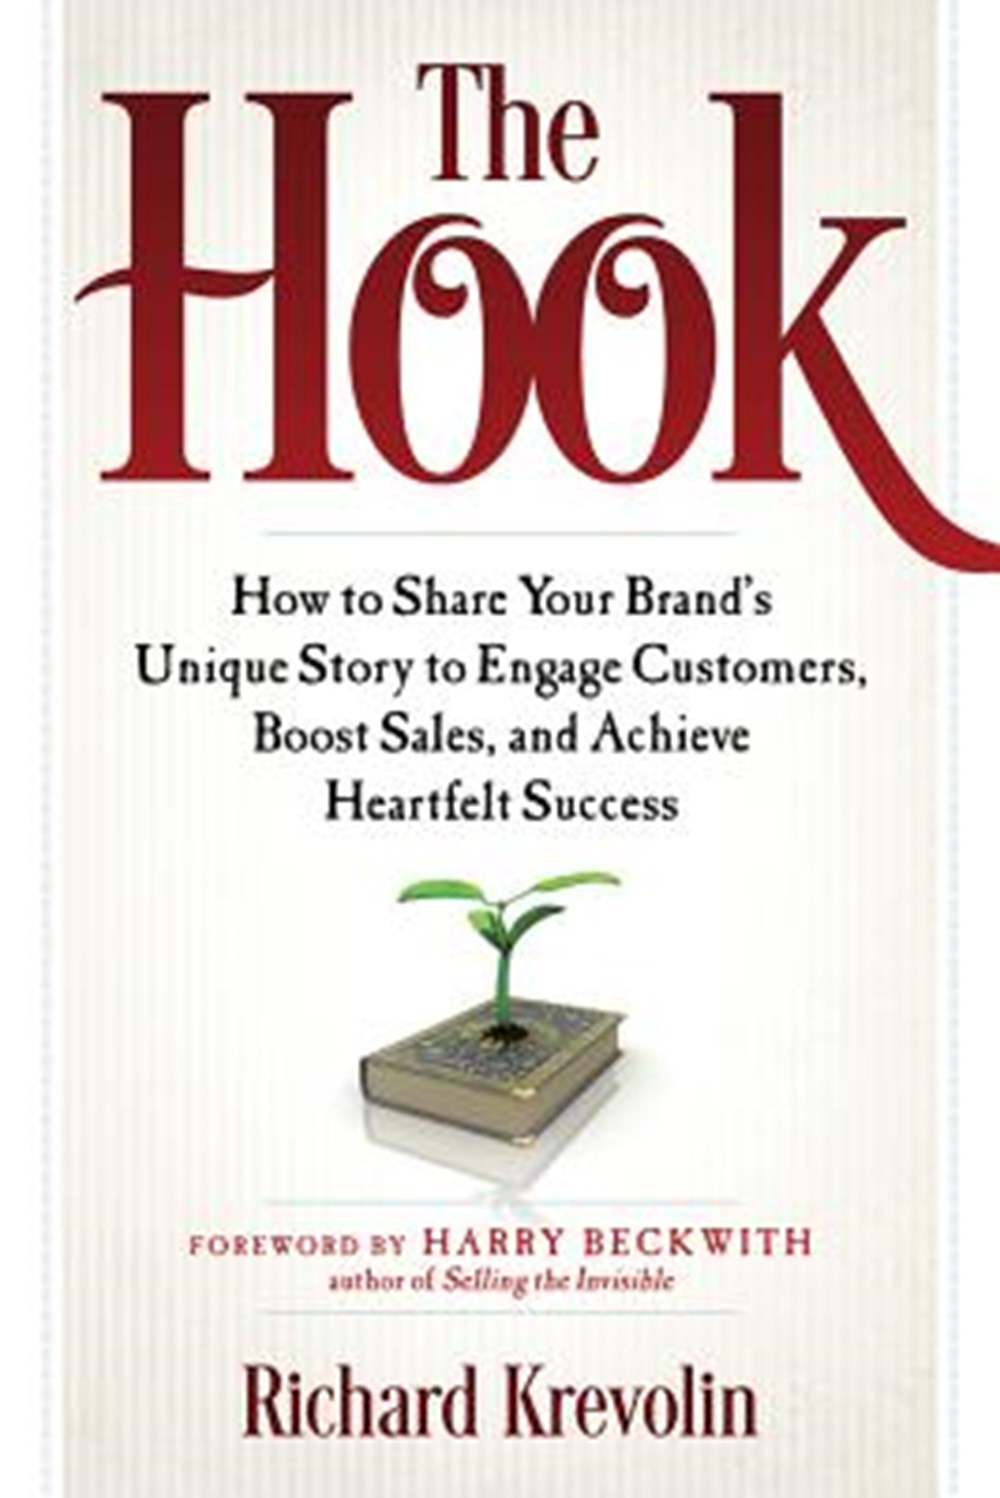 Hook How to Share Your Brand's Unique Story to Engage Customers, Boost Sales, and Achieve Heartfelt 